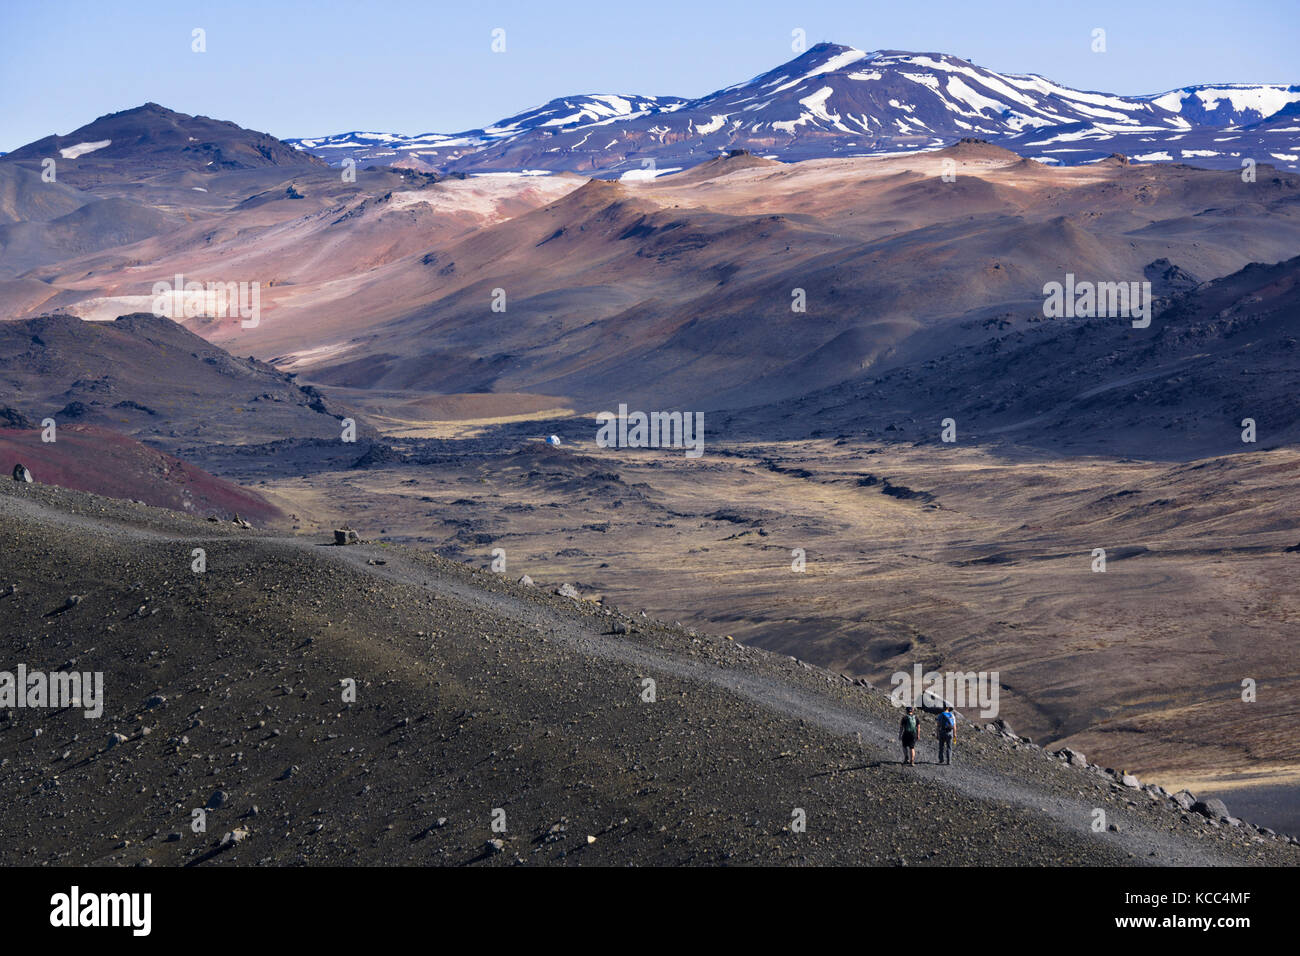 Hikers at Hverfell (also called Hverfjall) tephra cone or tuff ring volcano in northern Iceland, to the east of Mývatn. Stock Photo